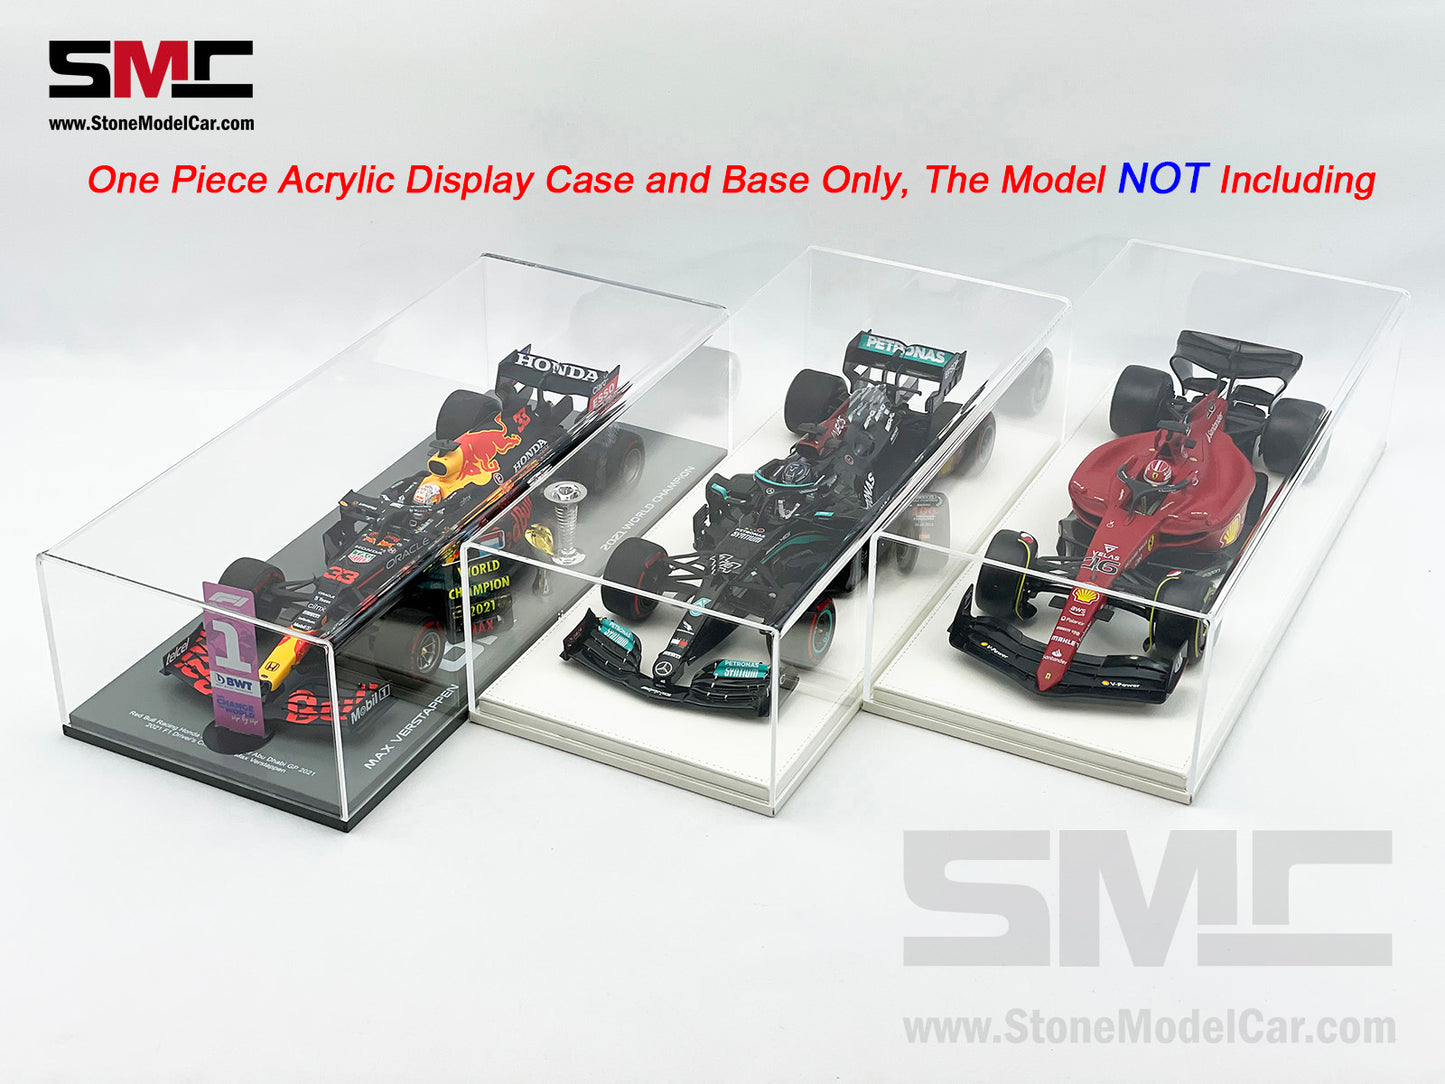 Premium Acrylic Display Cover & Show Case with White Eco-leather Base for 1:18 Car Models